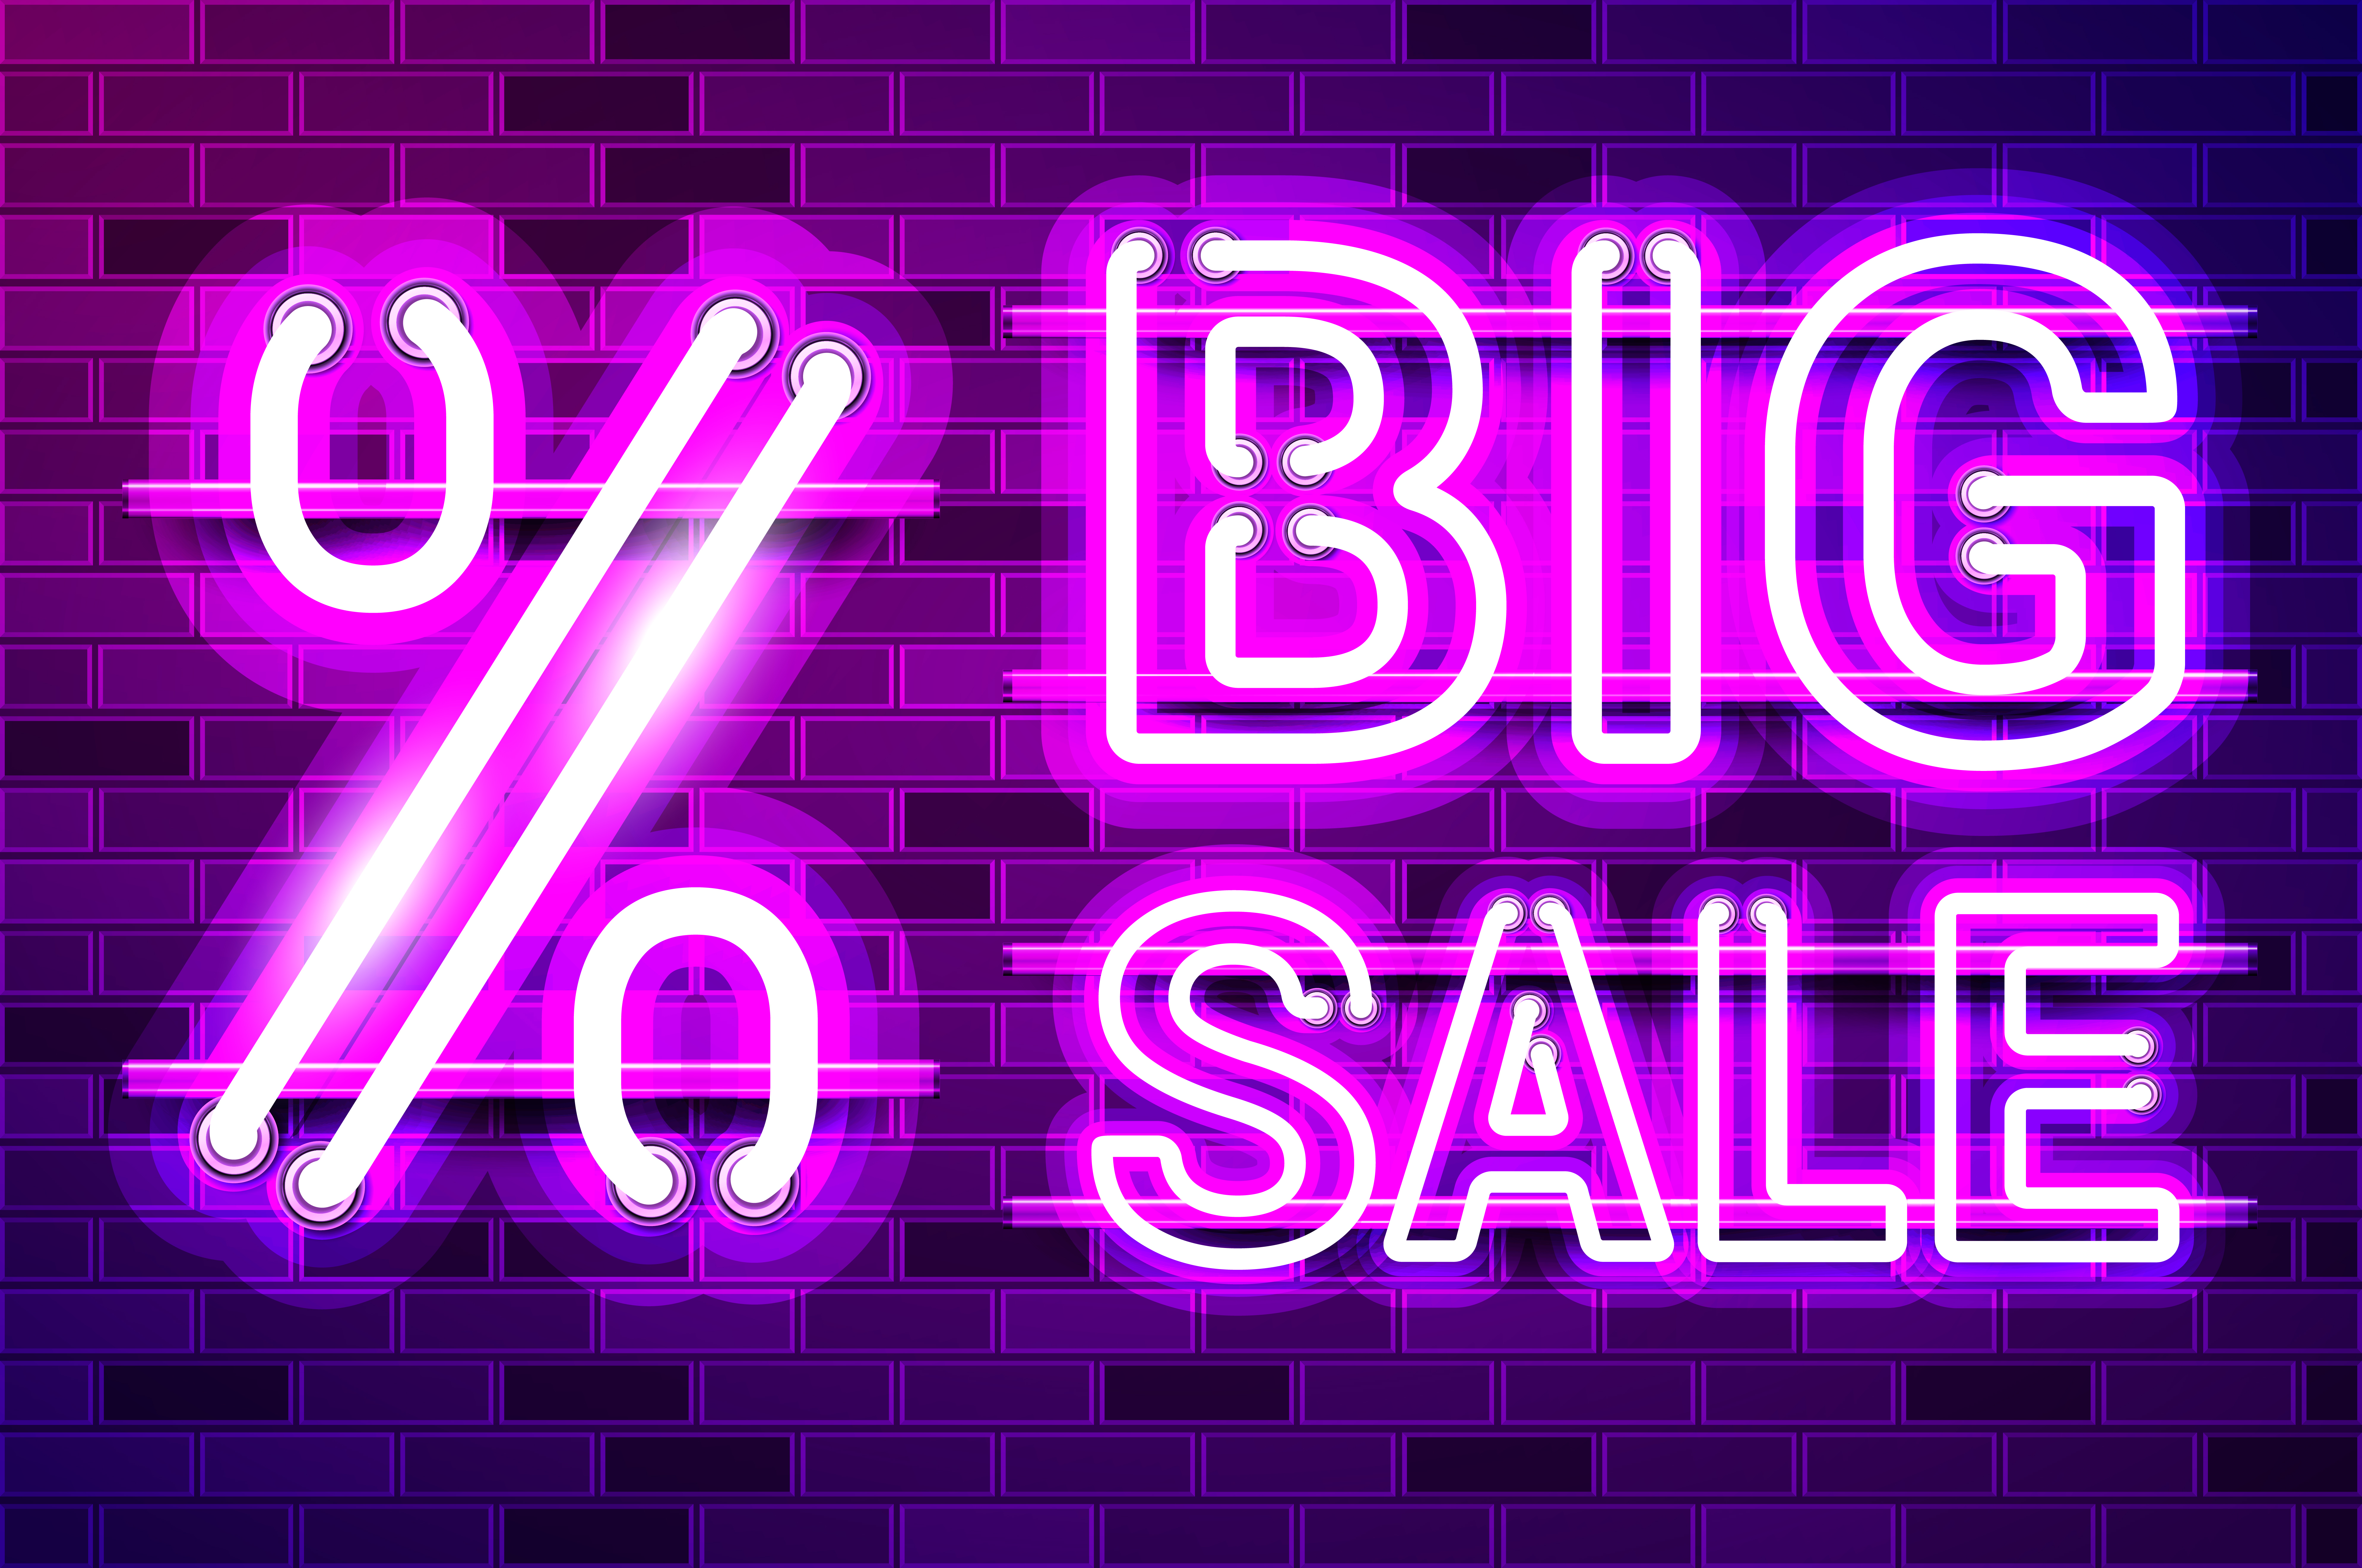 BIG SALE lettering with a large percent symbol glowing neon lamp sign. Realistic vector illustration. Purple brick wall, violet glow, metal holders.. BIG SALE lettering with a large percent symbol glowing purple neon lamp sign